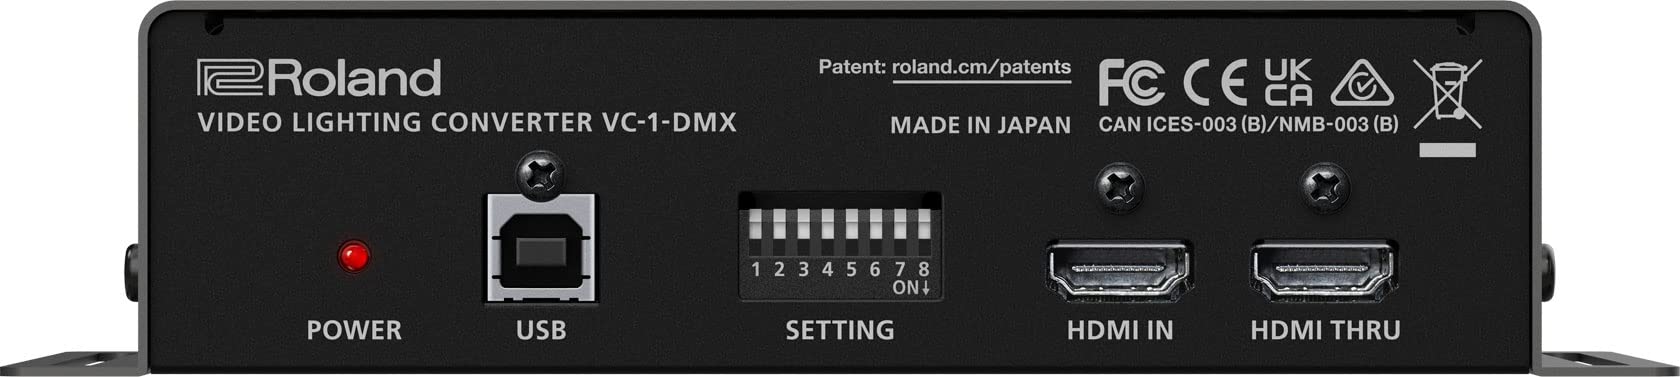 Roland Video Lighting Converter VC-1-DMX Automatically generate lighting effects_2